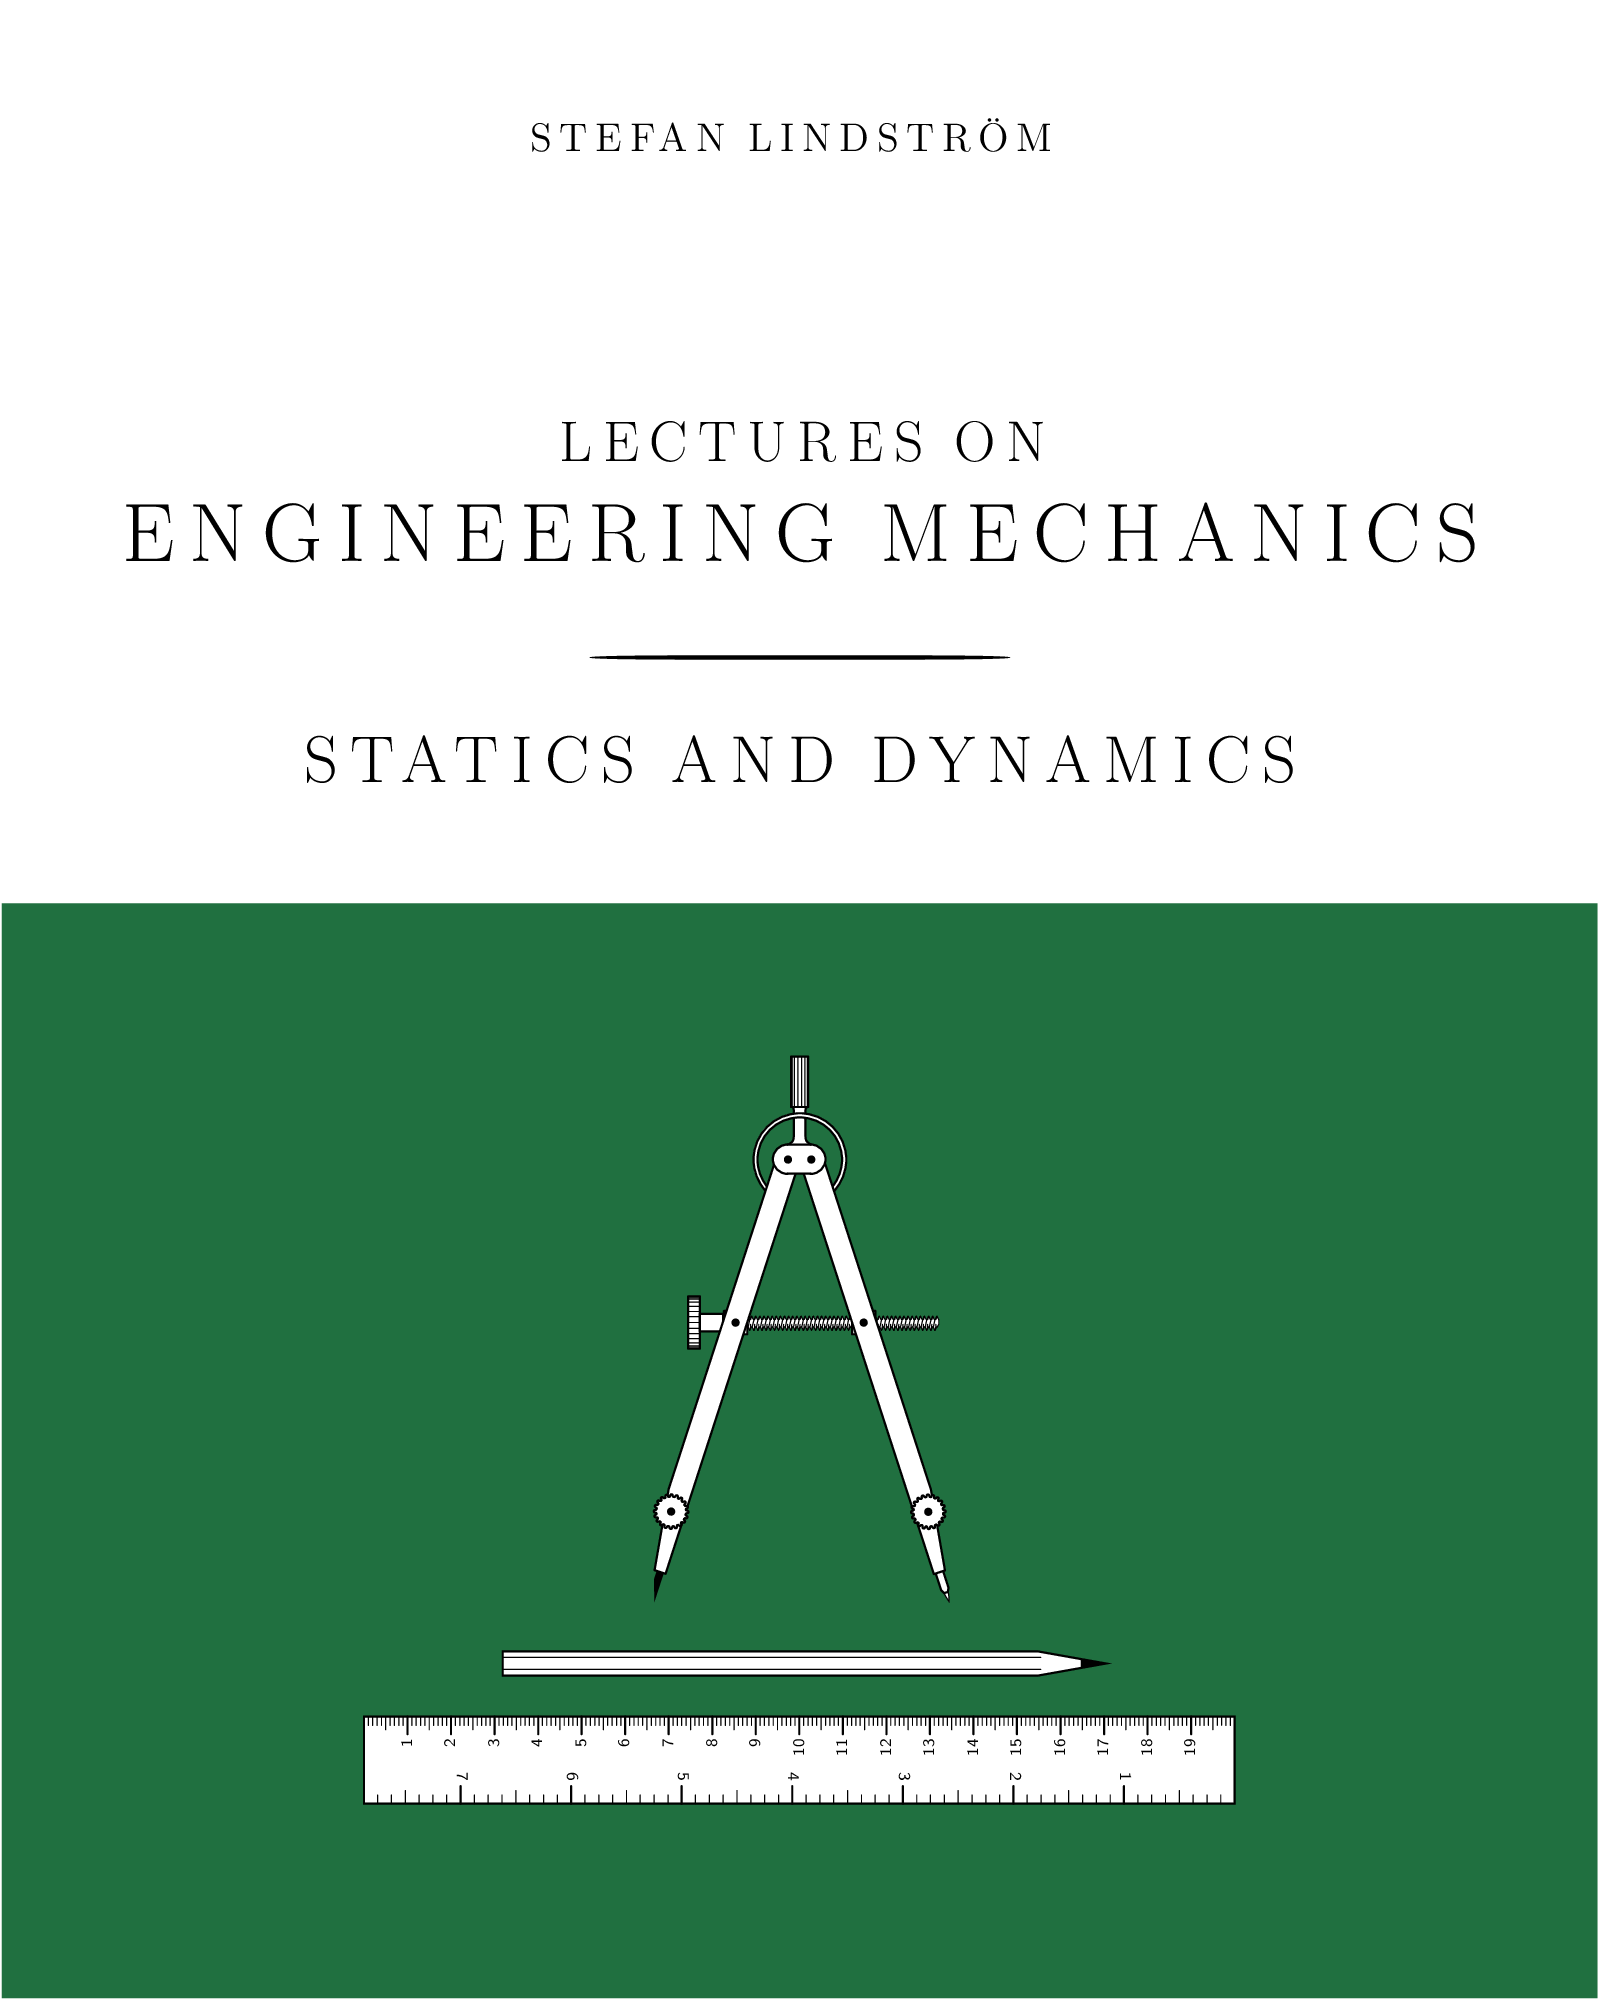 Lectures on Engineering Mechanics: Statics and Dynamics